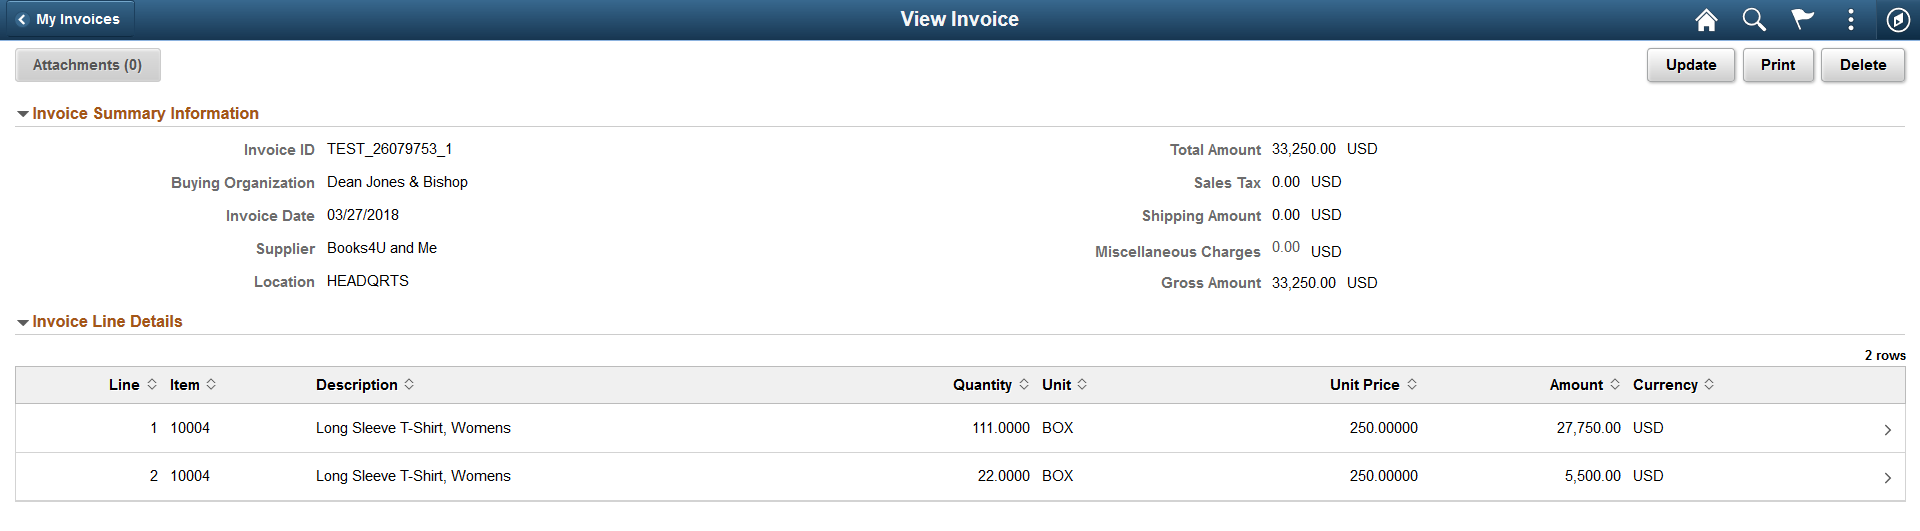 Self Service Invoice - Delete Invoice page as displayed on a Desktop